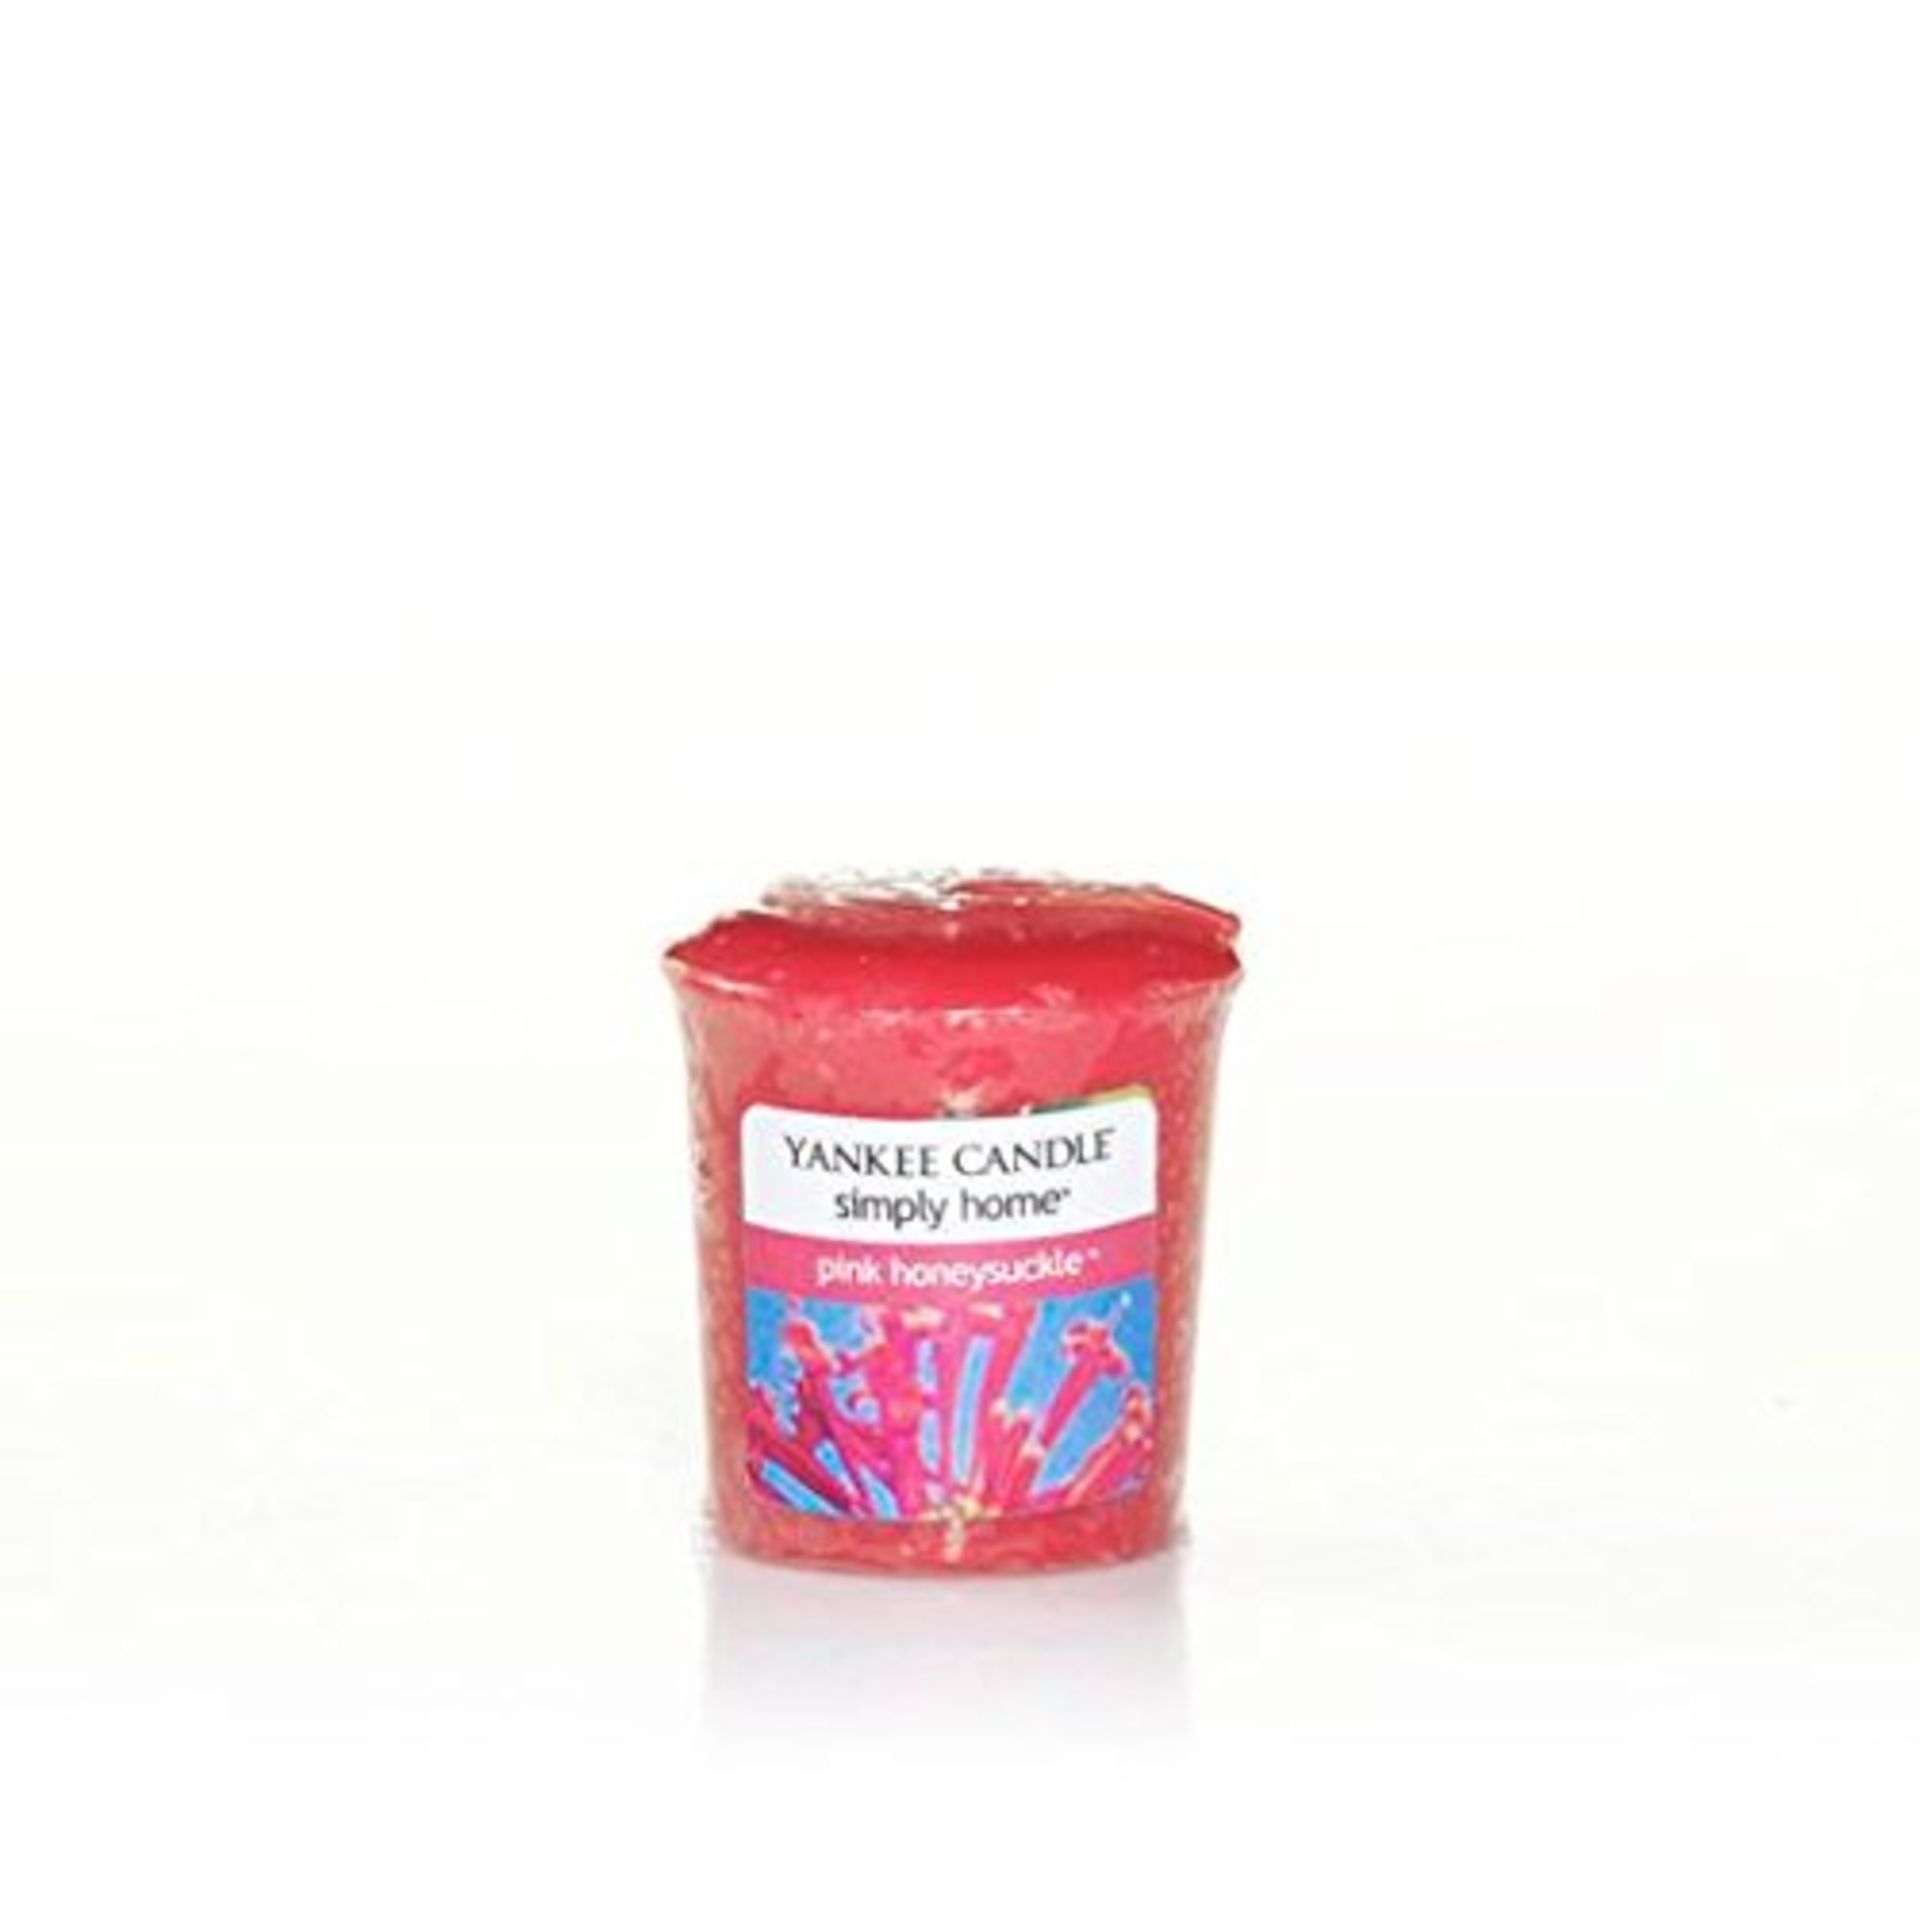 V *TRADE QTY* Brand New 18 x Yankee Candle Votive Pink Honeysuckle 49g Amazon Price £71.10 X 8 - Image 2 of 2